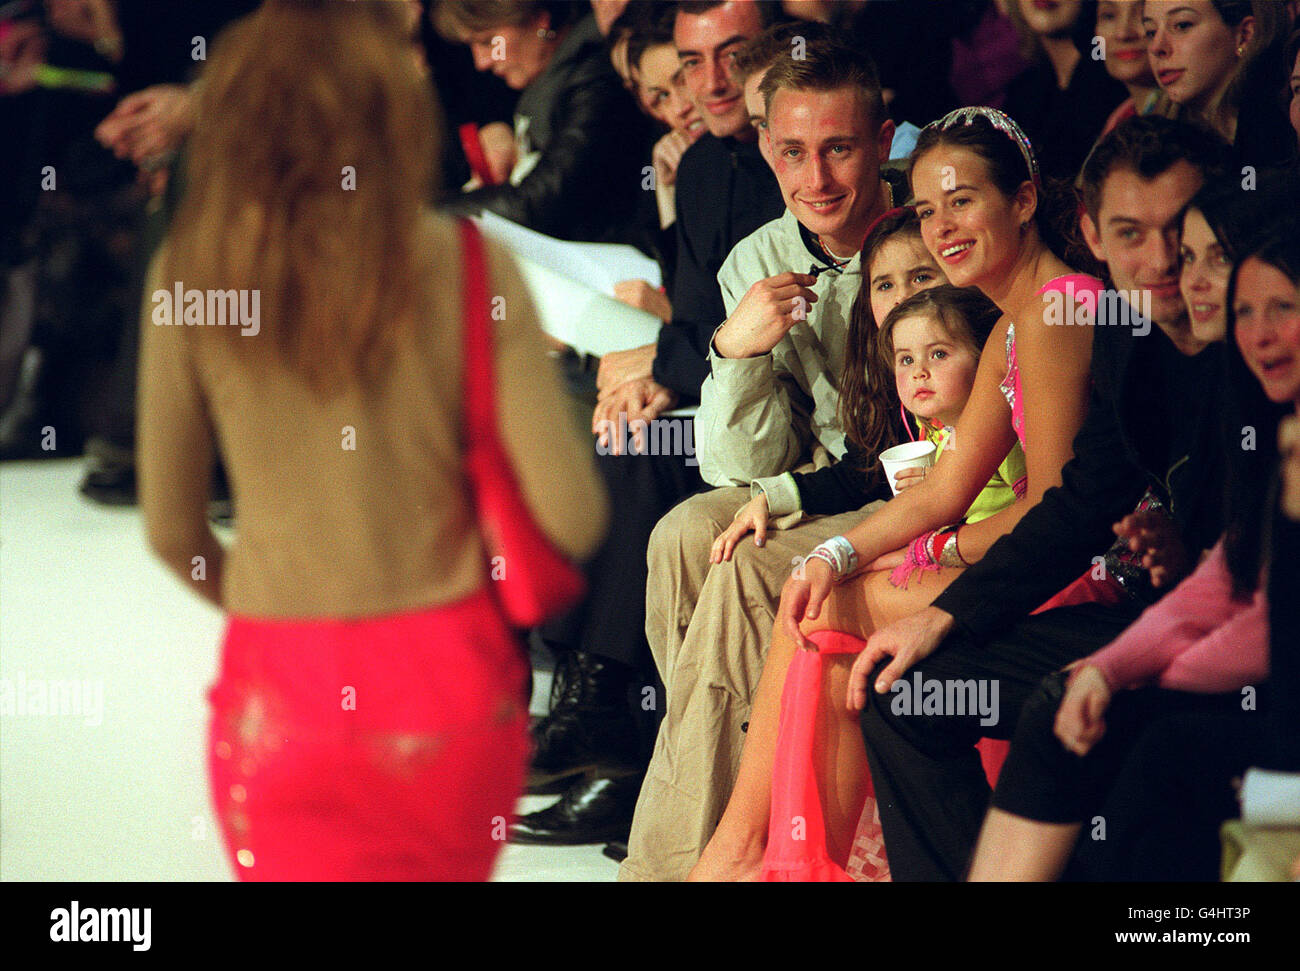 Jade Jagger, daughter of Rolling Stones Star Mick, enjoys the show from British Designer Matthew Williamson, alongside Ex-Boyfriend Euan MacDonald (left) and daughters Assisi (centre left) and Amba during London Fashion Week. *02/12/2000 Jade Jagger at the Highland Spring Face of '98. Rolling Stone lead singer's daughter Jade and two granddaughter's had a narrow escape from death when they miraculously survived a head-on crash on the island Ibiza, it emerged. Jade, in her late 20s, and her two young daughter's Amba and Assisi were travelling in a Chevrolet 4x4 jeep on the Mediterranean island Stock Photo